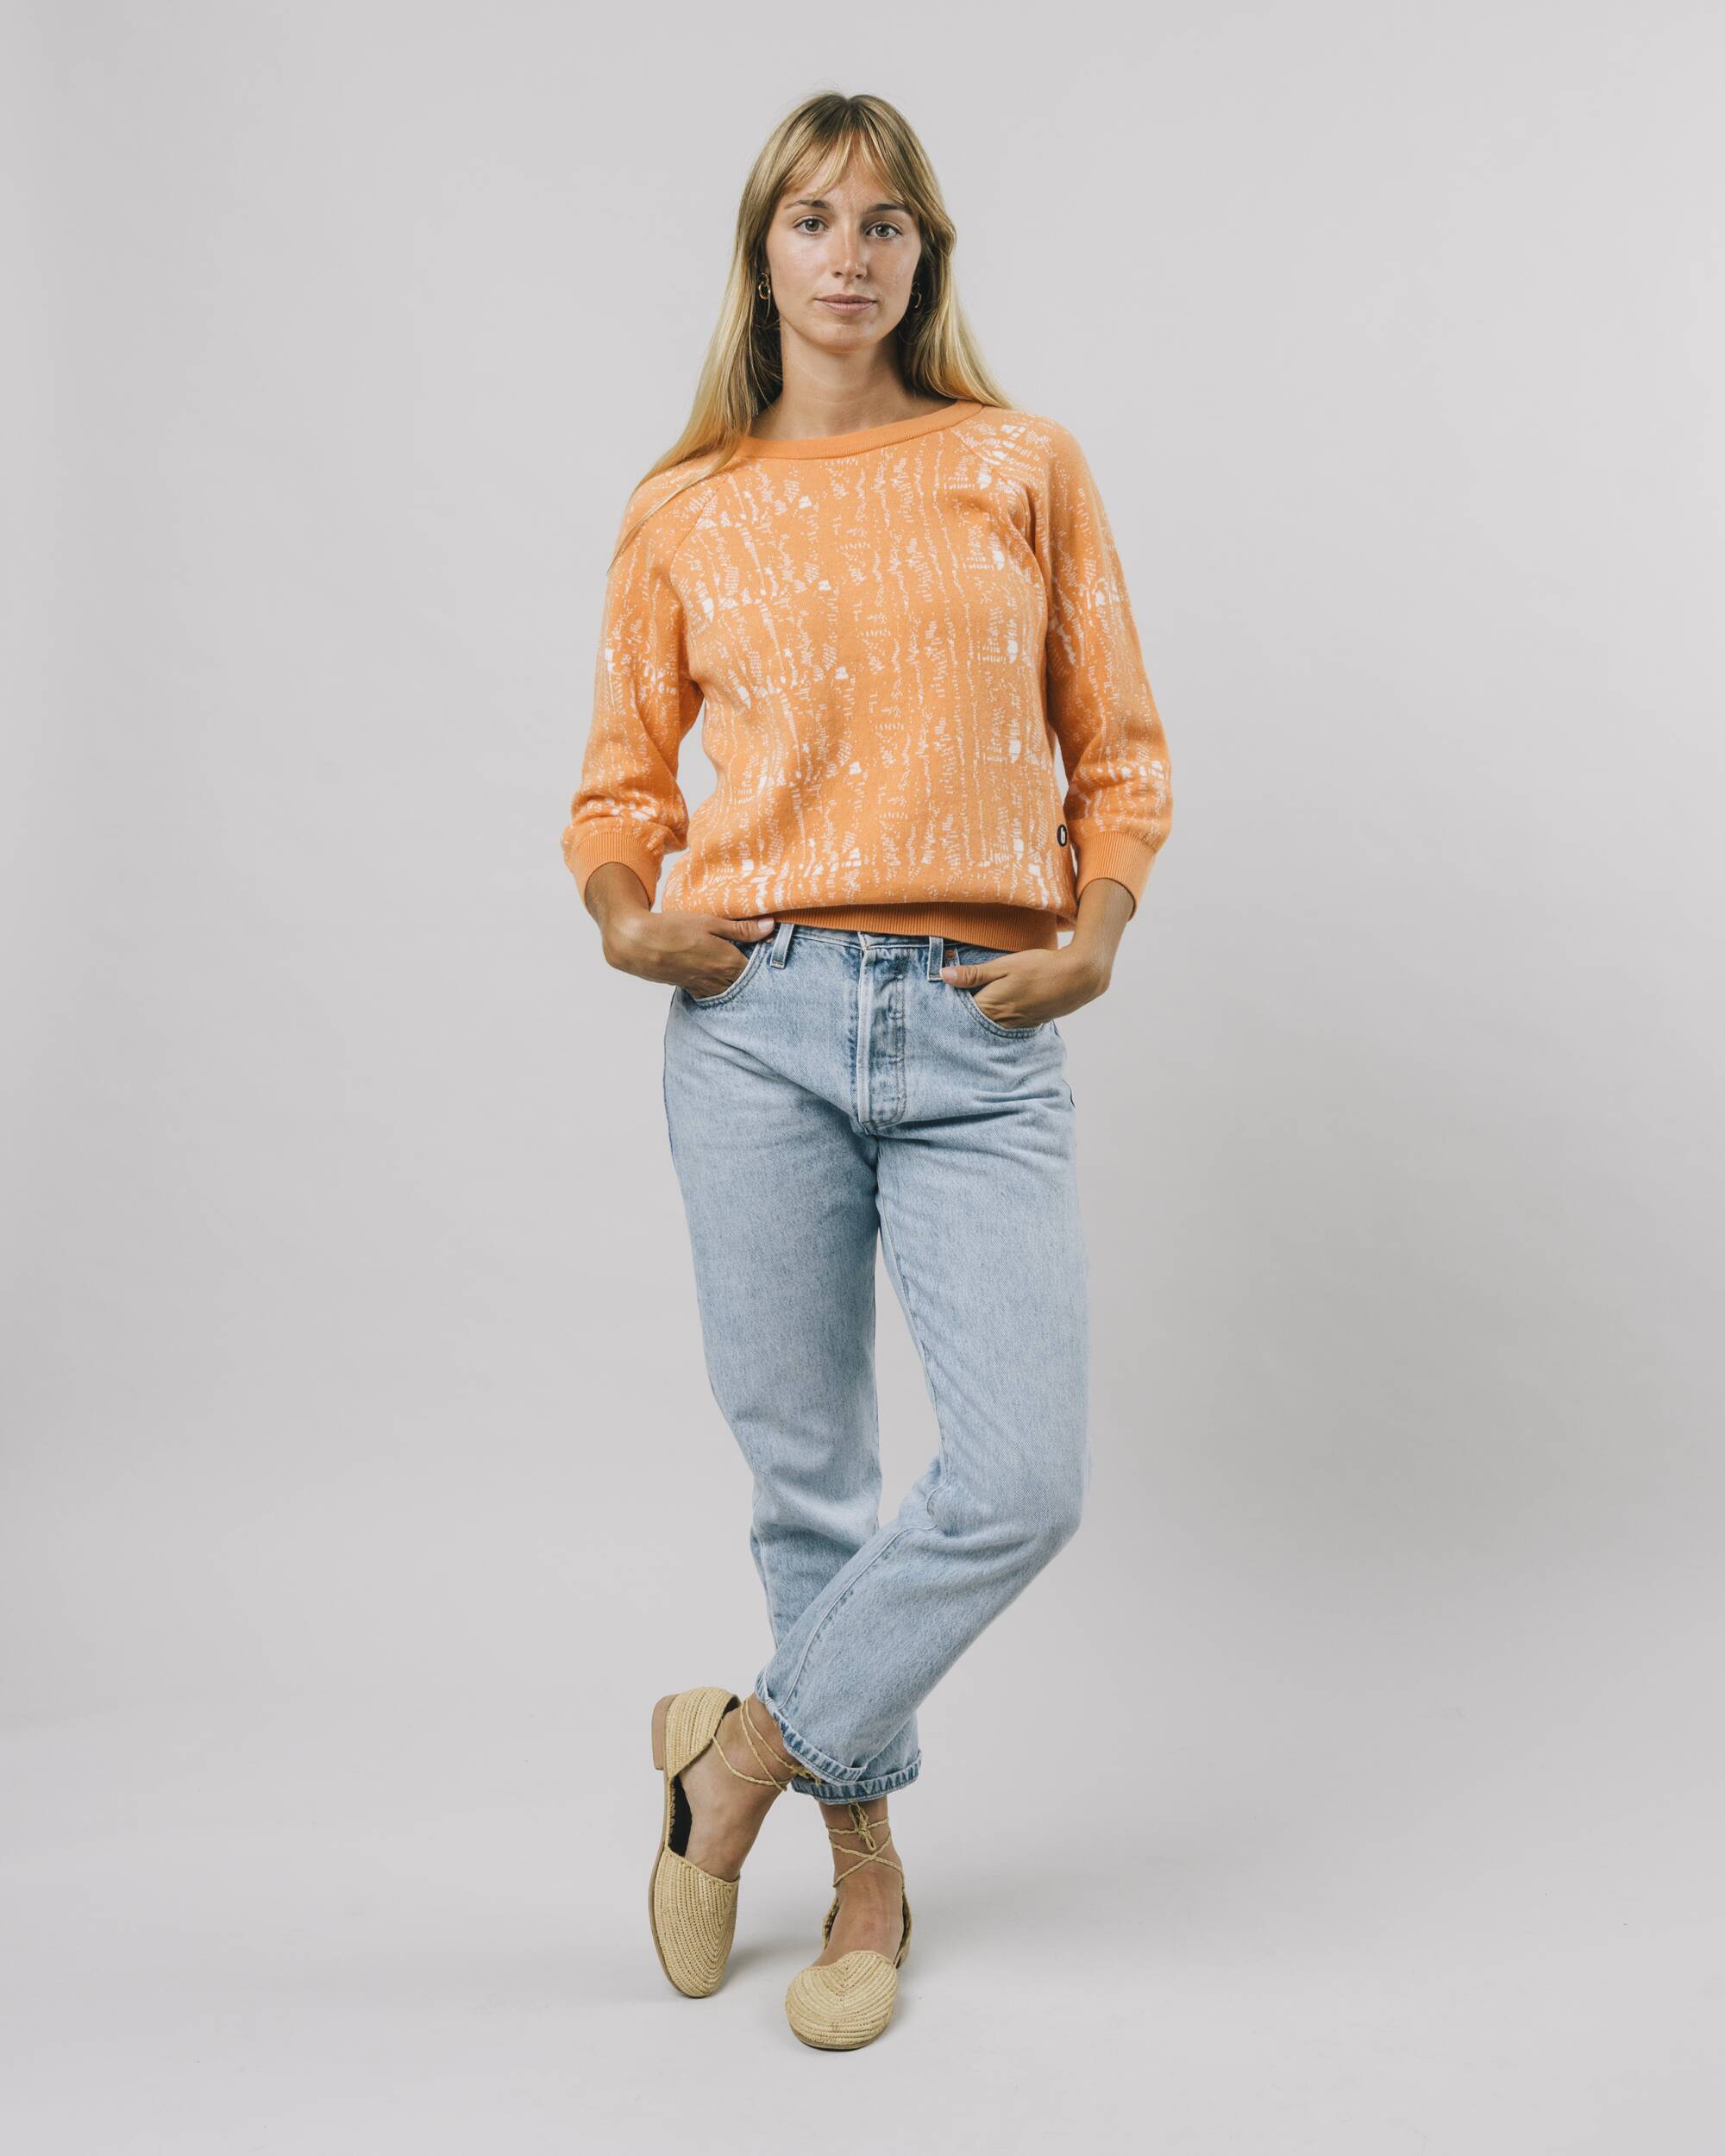 Sweater "Camou" in orange with ¾ sleeves made of 100% organic cotton from Brava Fabrics